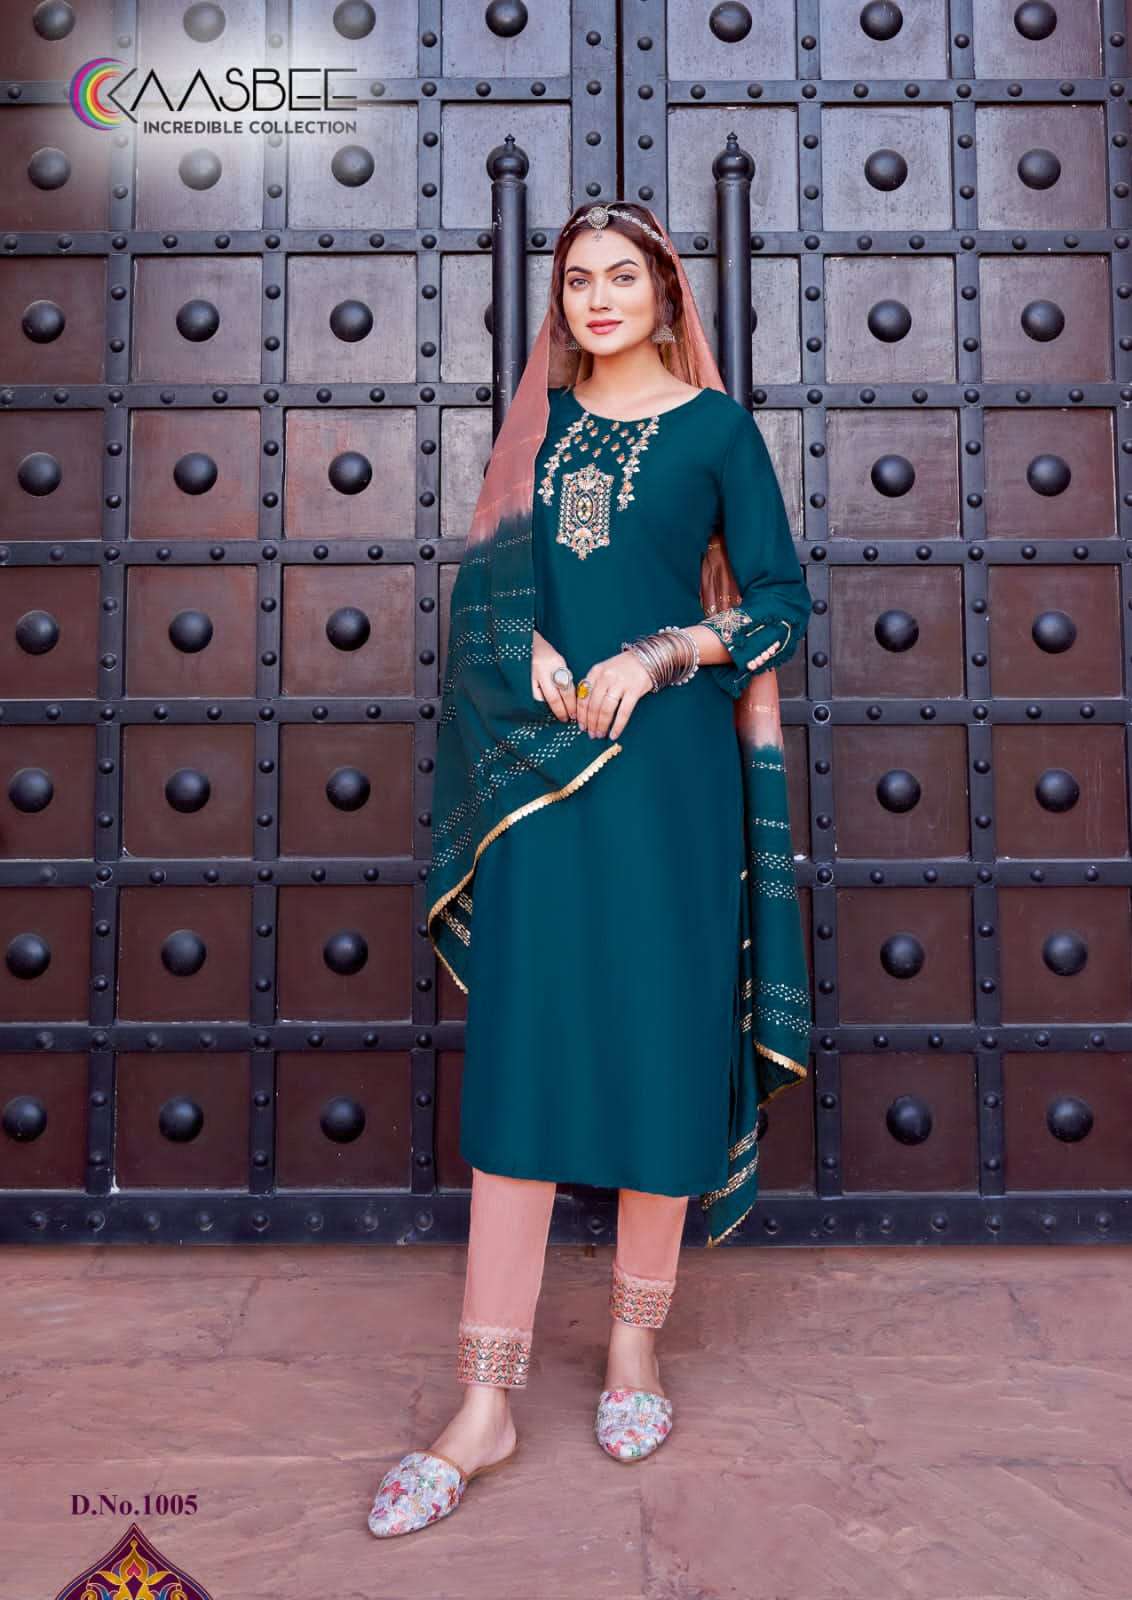 Rajwadi Vol-1 By Kaasbee 1001 To 1006 Series Beautiful Stylish Festive Suits Fancy Colorful Casual Wear & Ethnic Wear & Ready To Wear Pure Viscose Chinnon Dresses At Wholesale Price